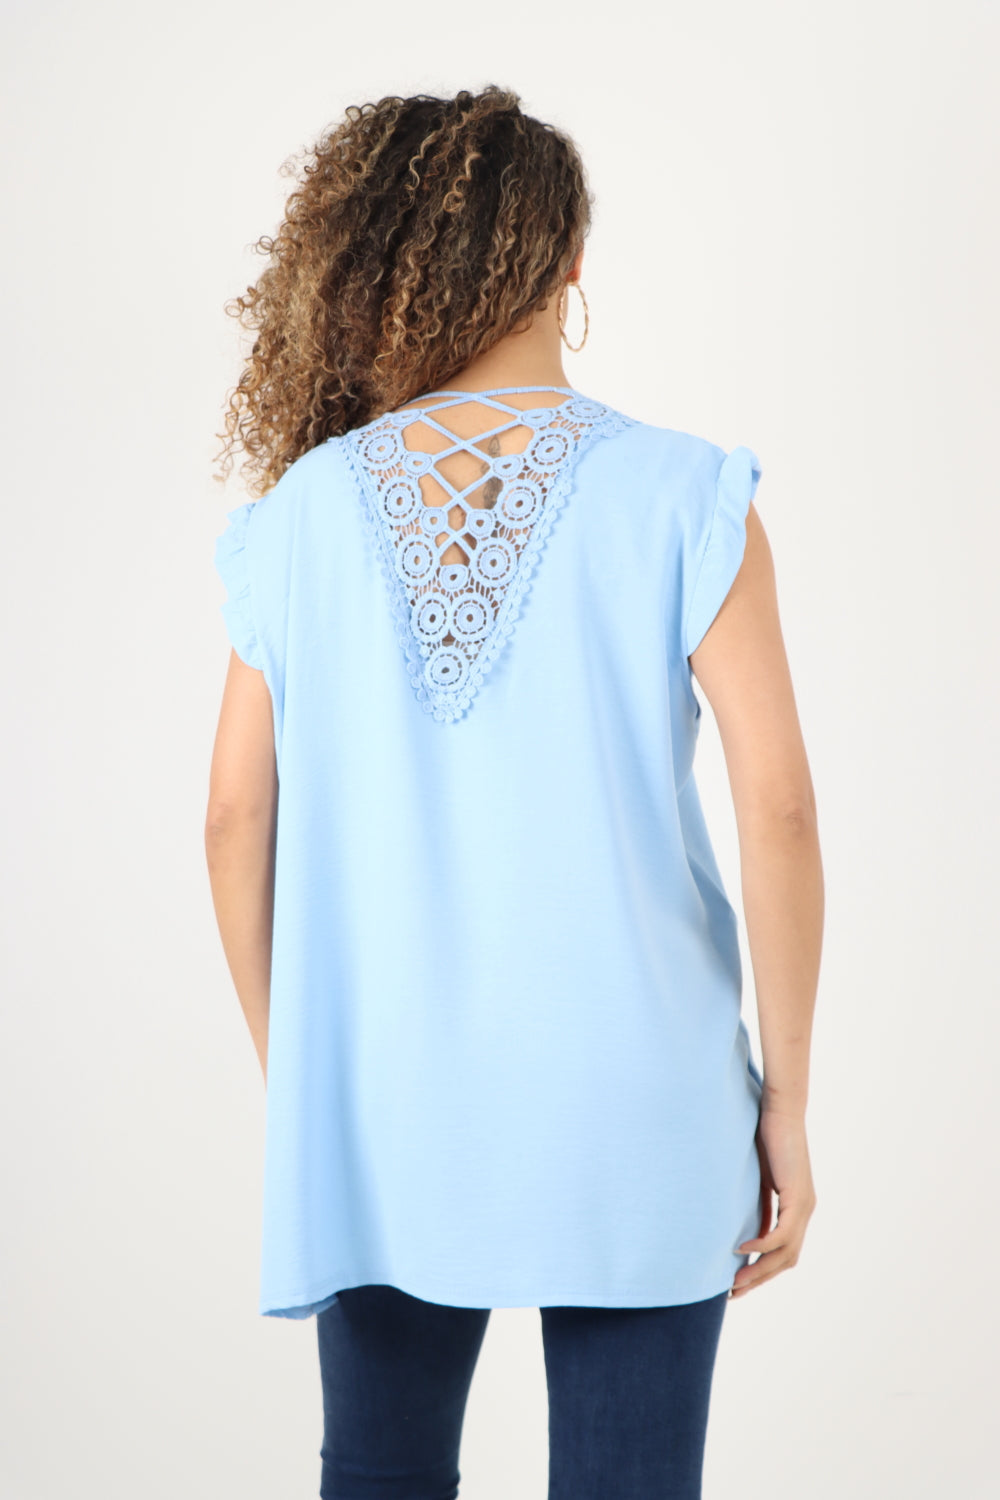 Cap Sleeve With Detailed Back Lace Design Top